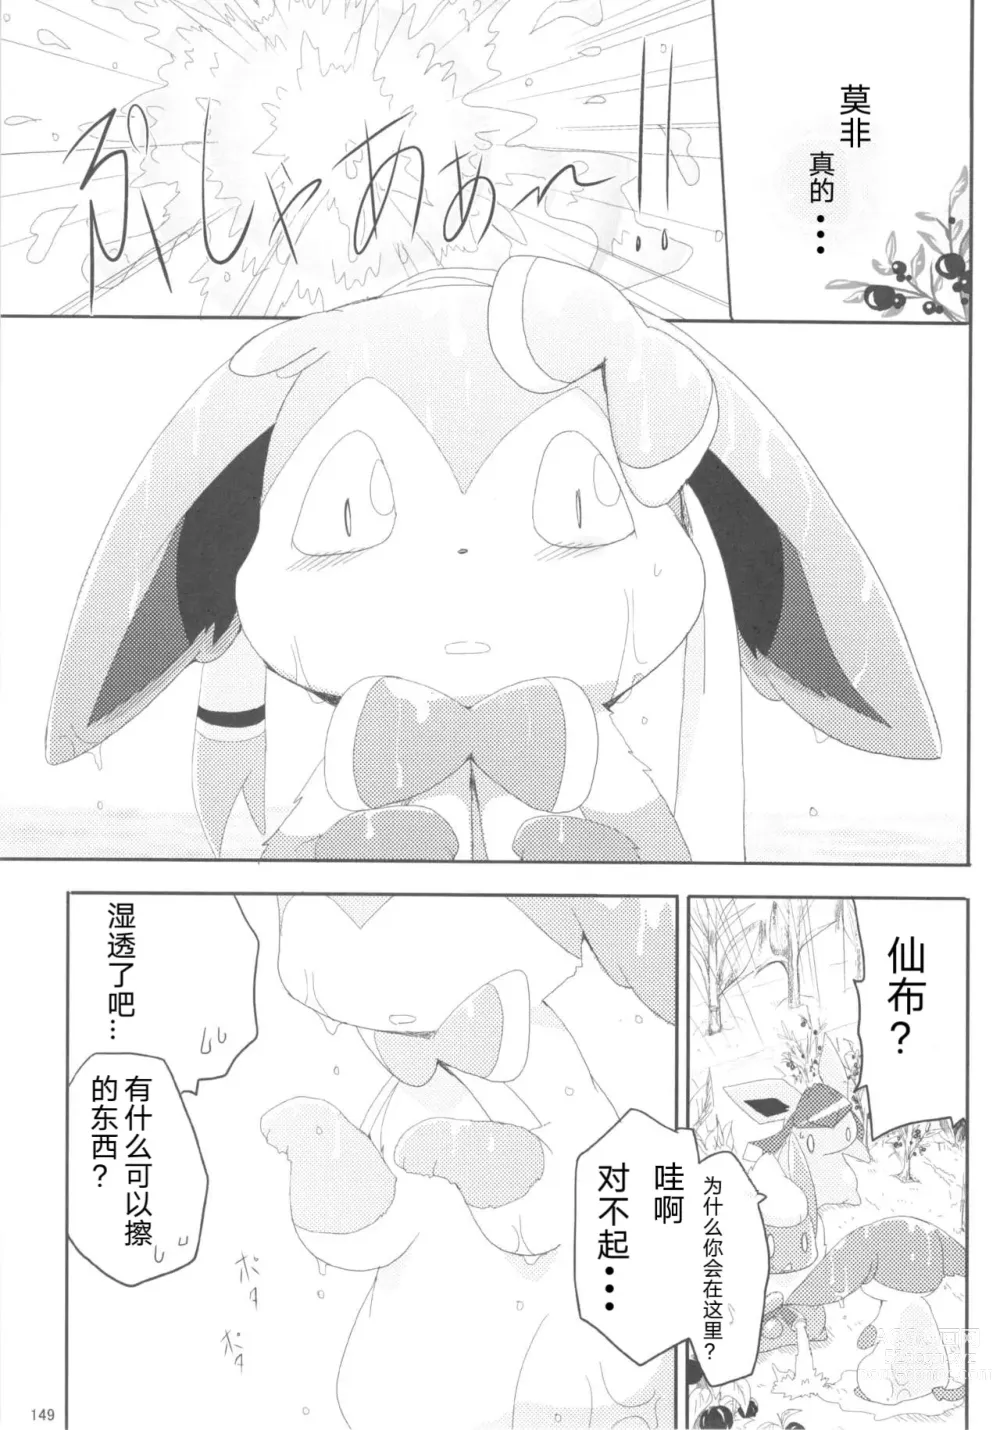 Page 10 of doujinshi Love Berry